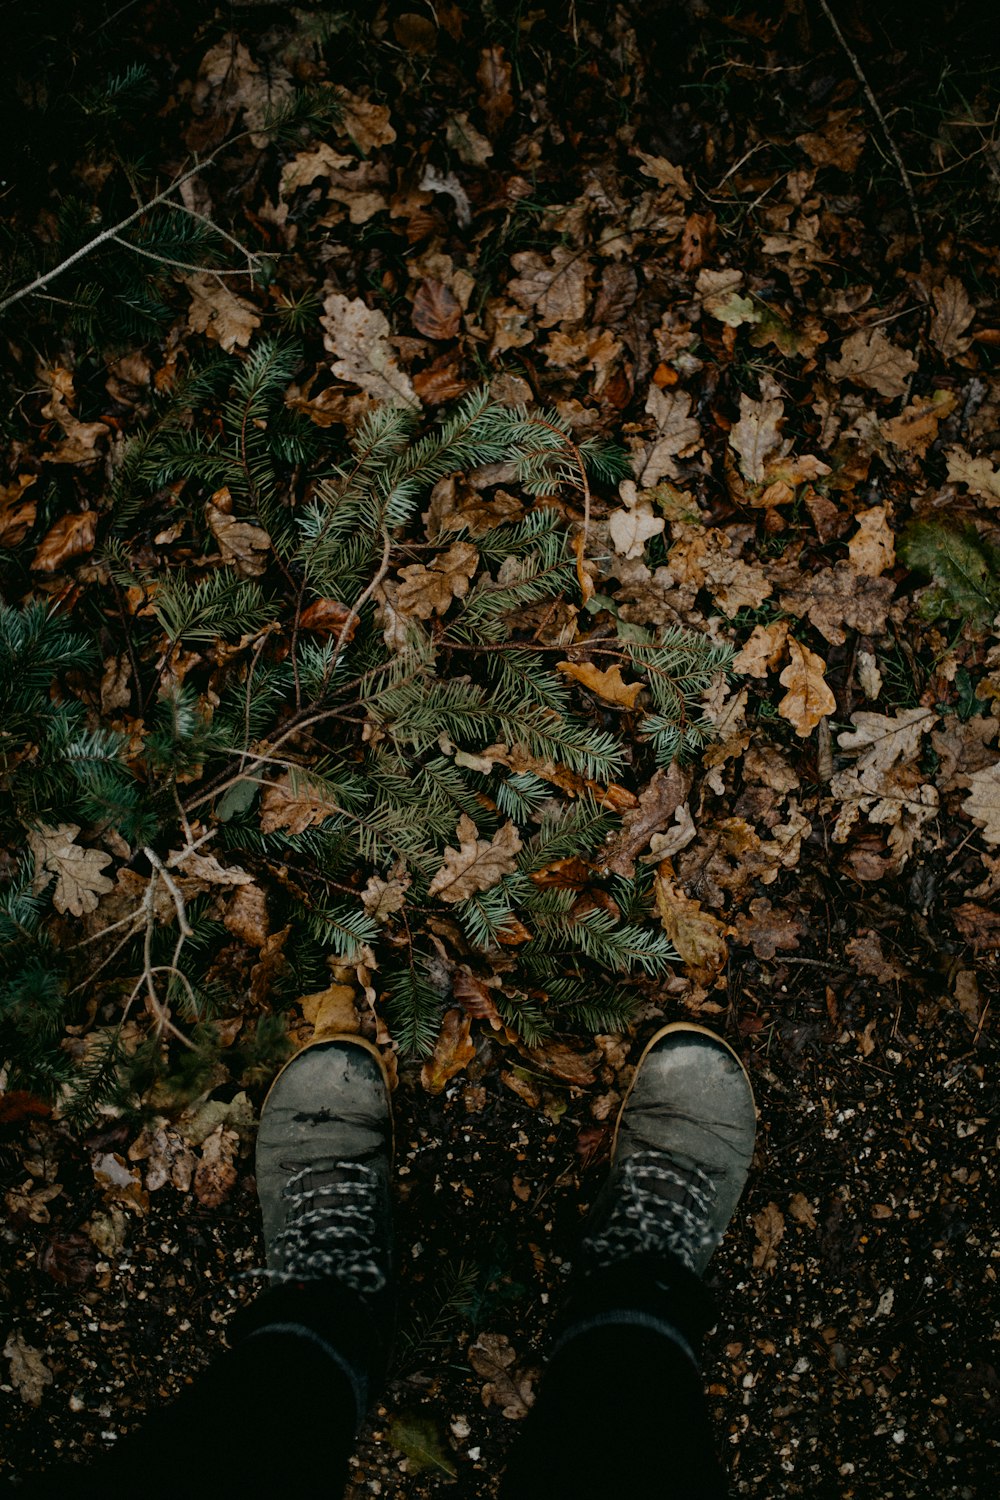 a person's feet standing in a pile of leaves